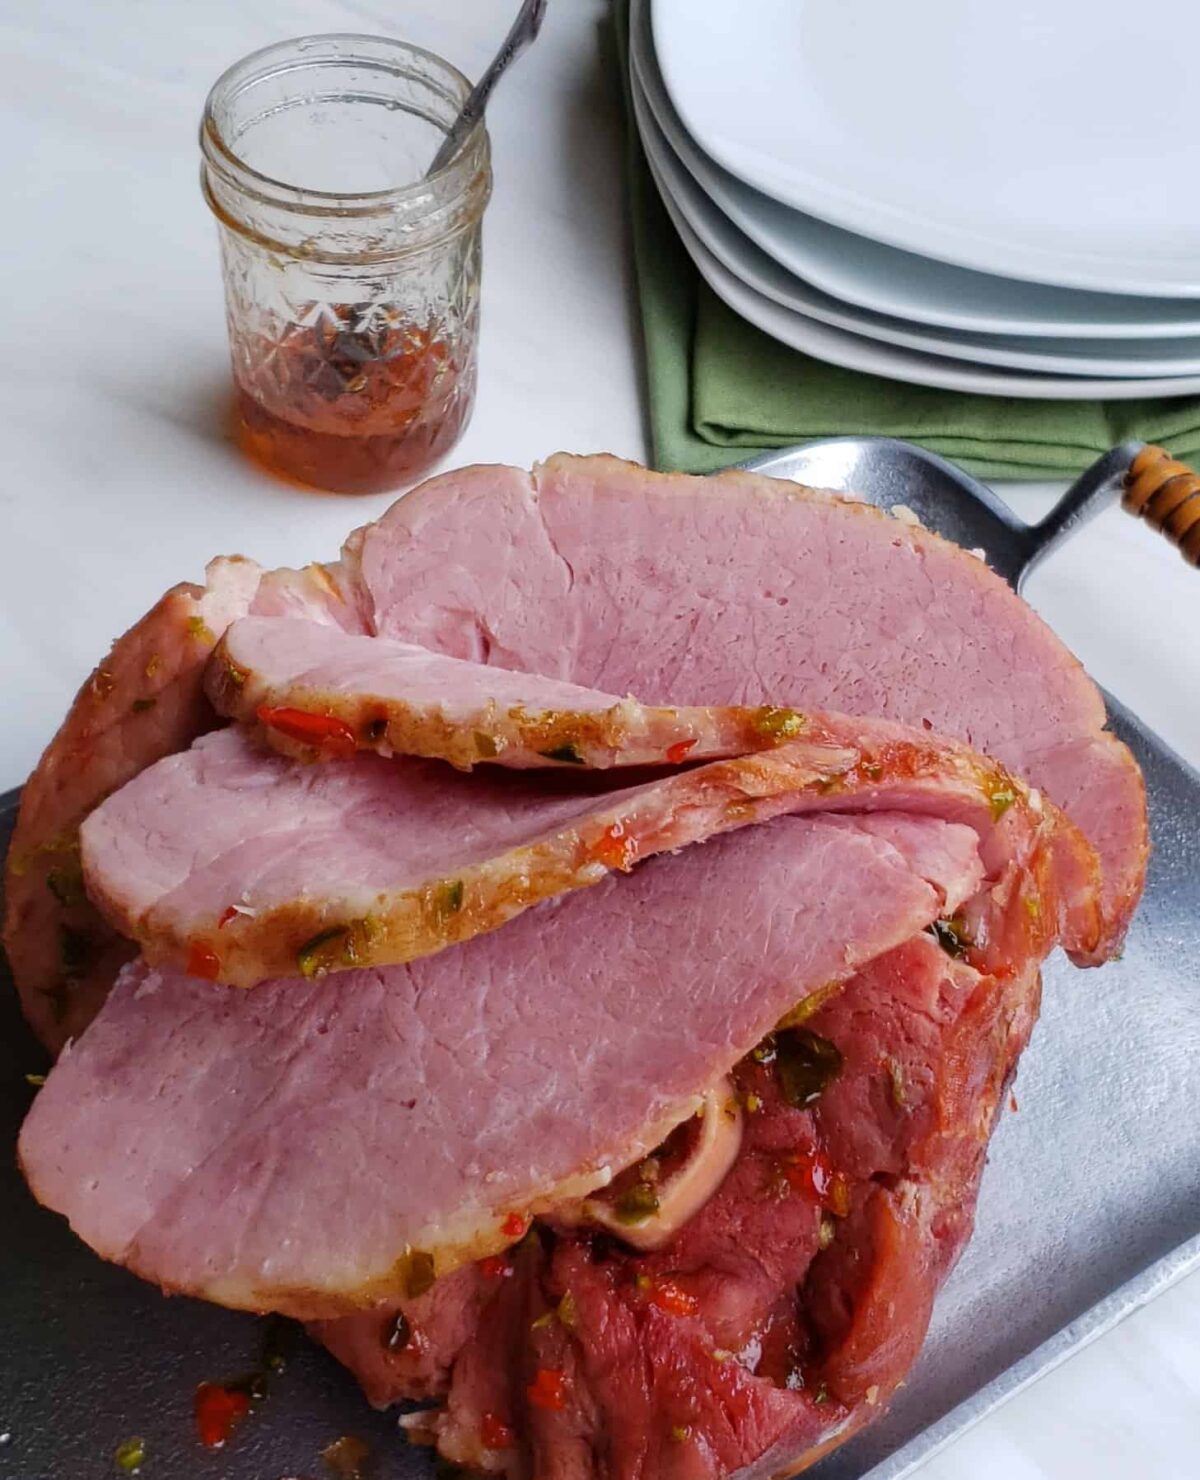 bone in Easter ham with slices cut on the ham. jar of jelly